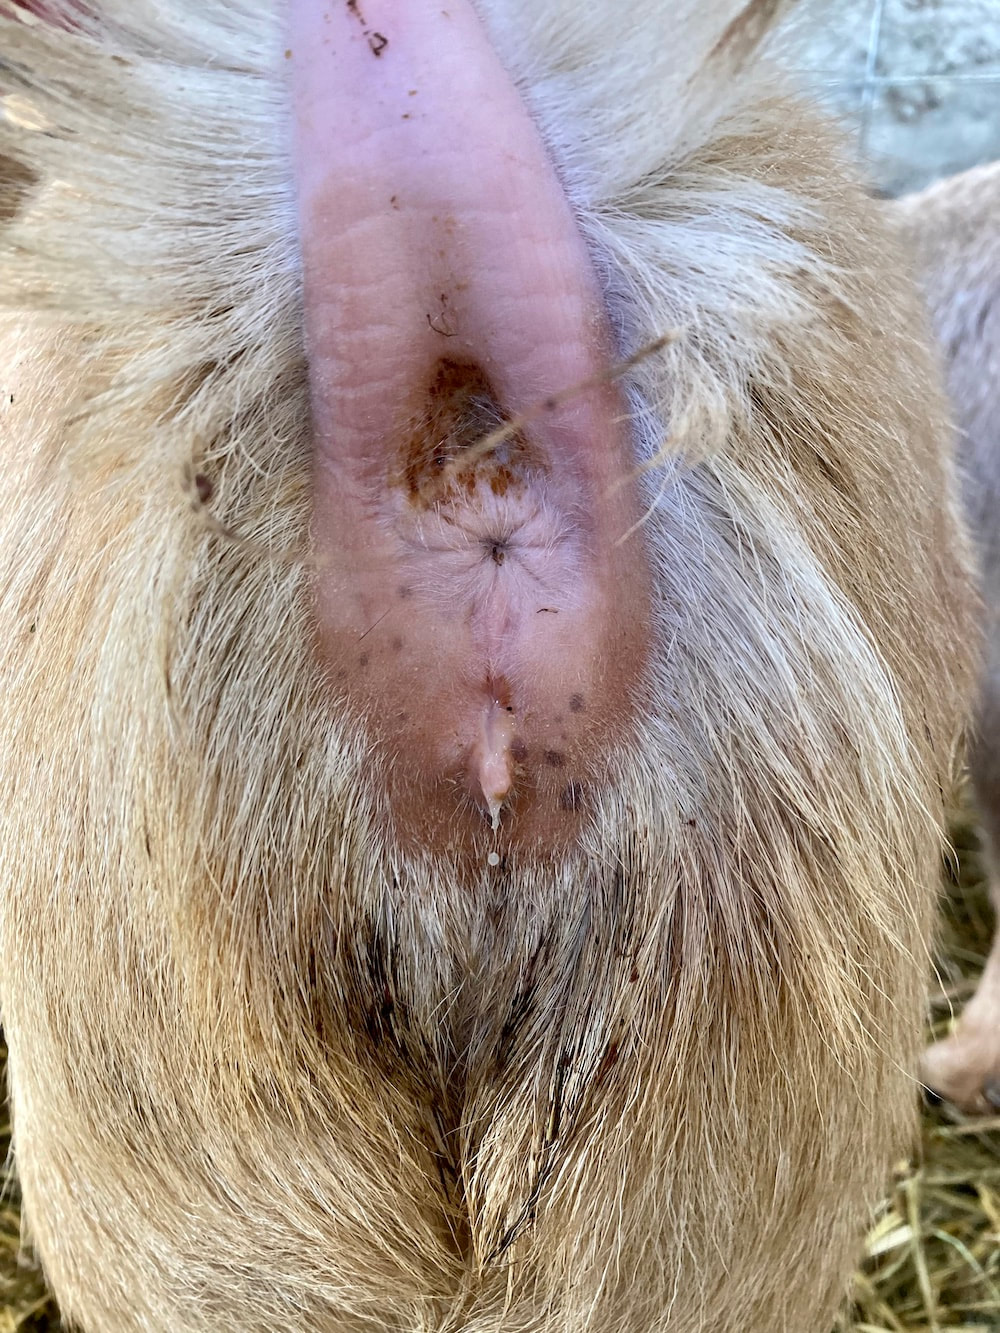 Example of goat cervical mucus